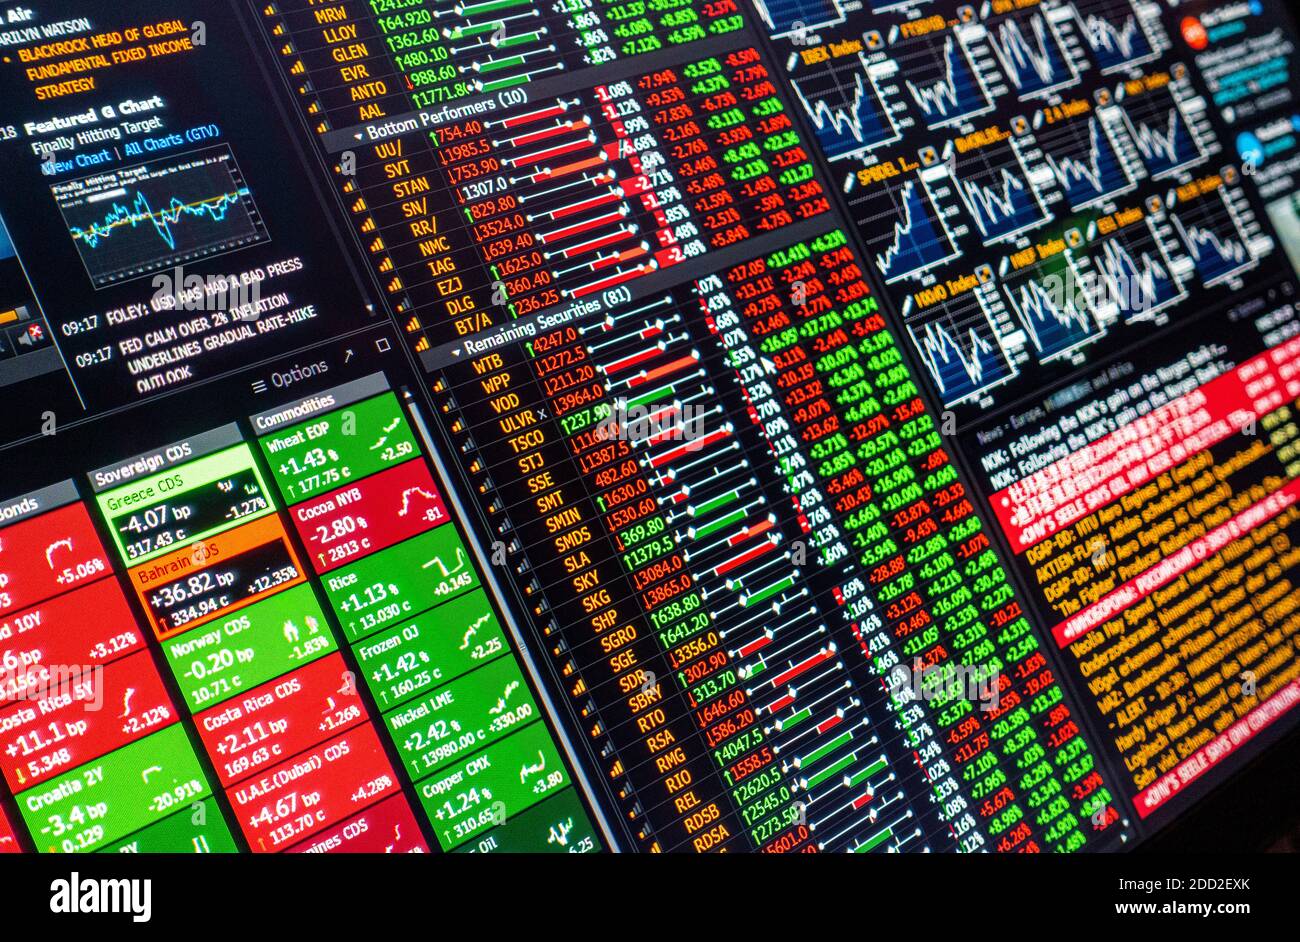 Computer screen close up showing stock exchange finance data financial markets stocks shares commodities credit default swaps CDS stock market news Stock Photo